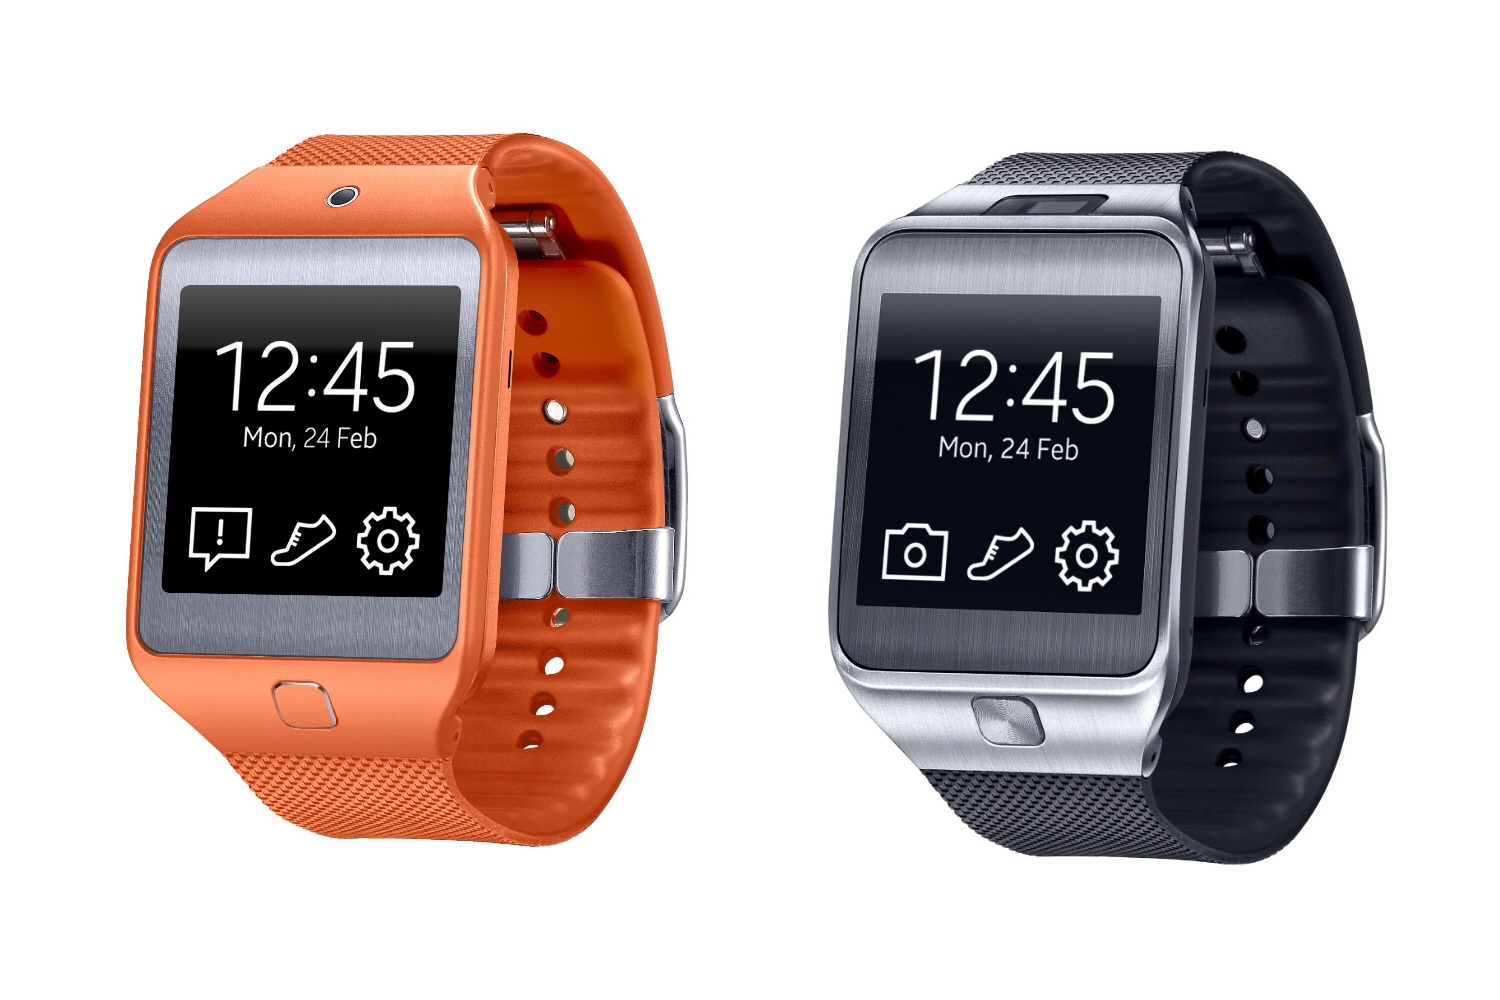 Smartwatches: Samsung's Galaxy 2 Watch Drops for Tizen | Time